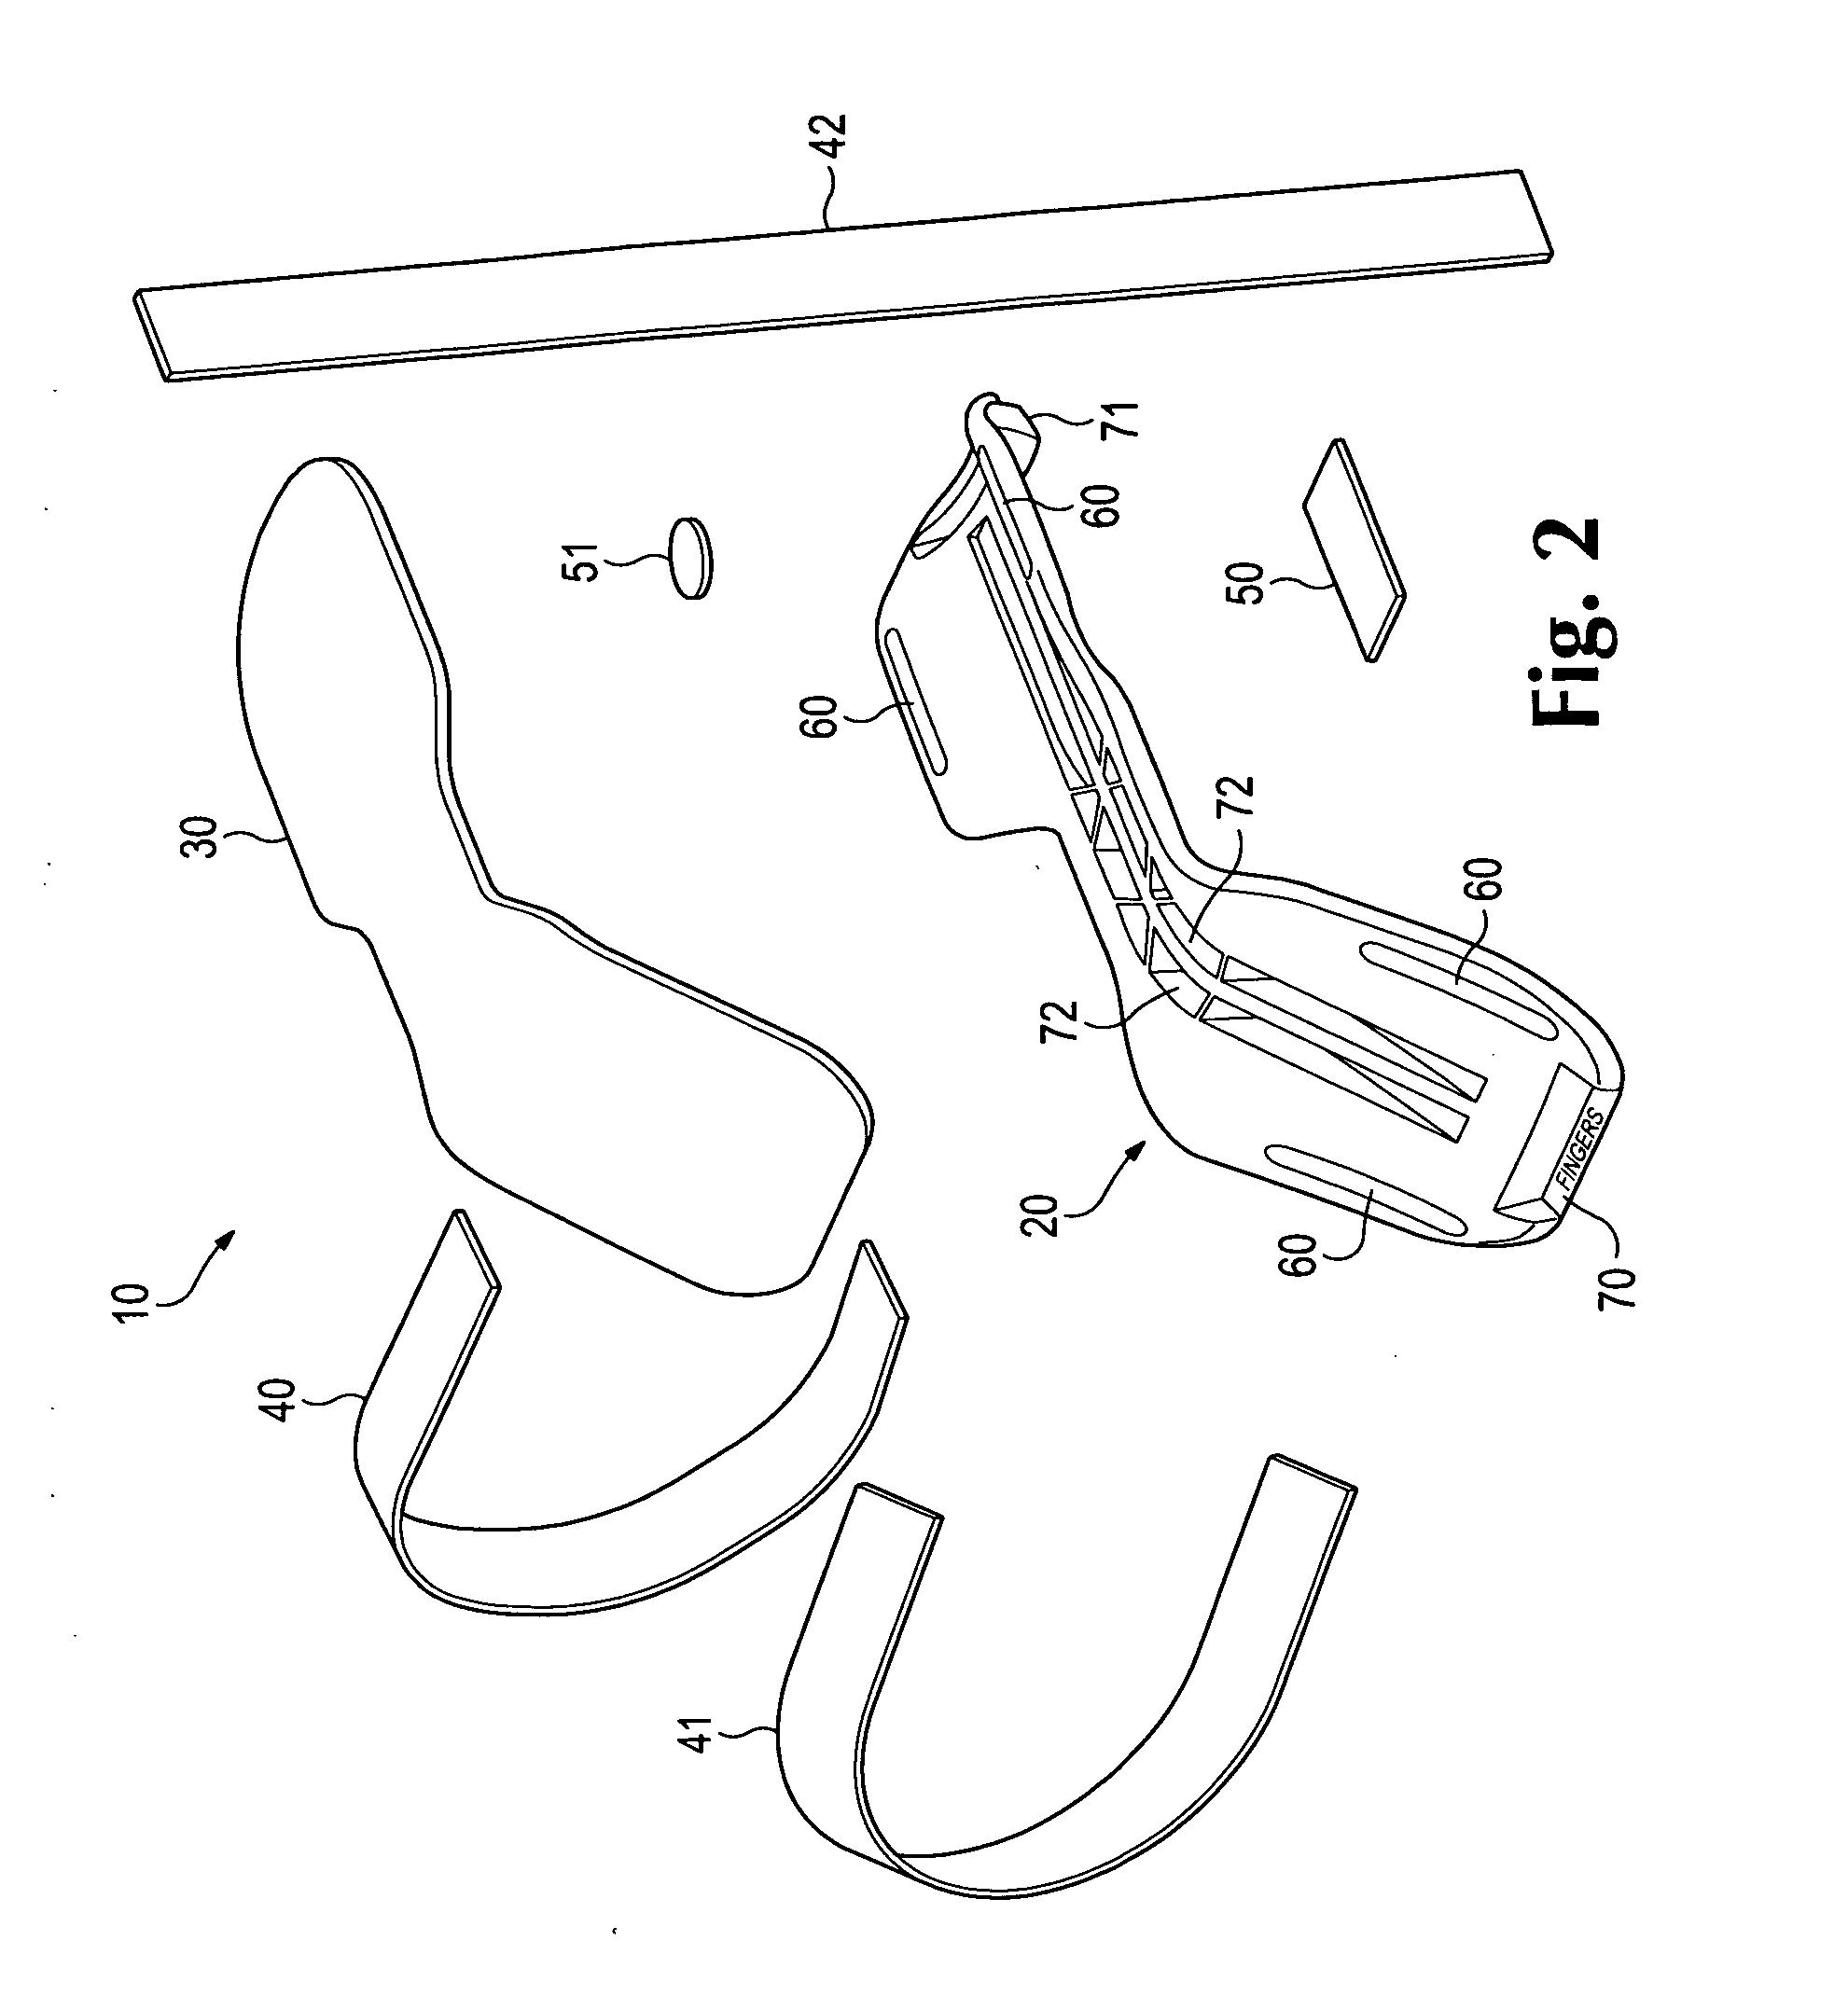 Apparatus and method of use for a wrist extension brace